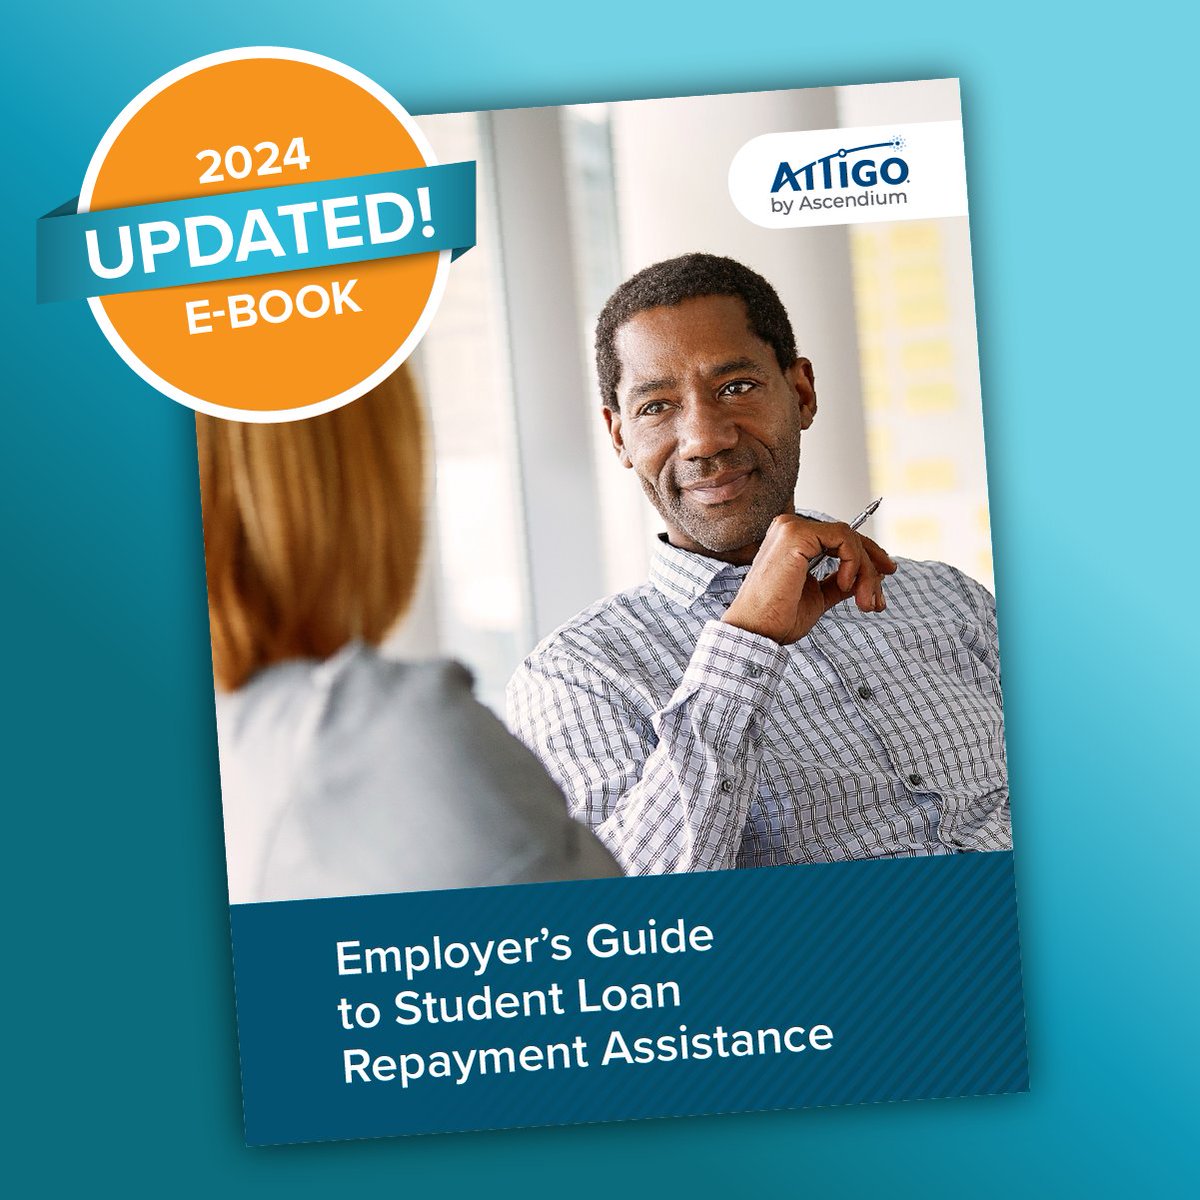 Our Employer’s Guide to Student Loan Repayment Assistance just got better! We’re excited to share the newest edition of this incredibly helpful employer-focused resource. Check it out! bit.ly/3rHi5W9 #Attigo by @AscendiumEd #SLRA